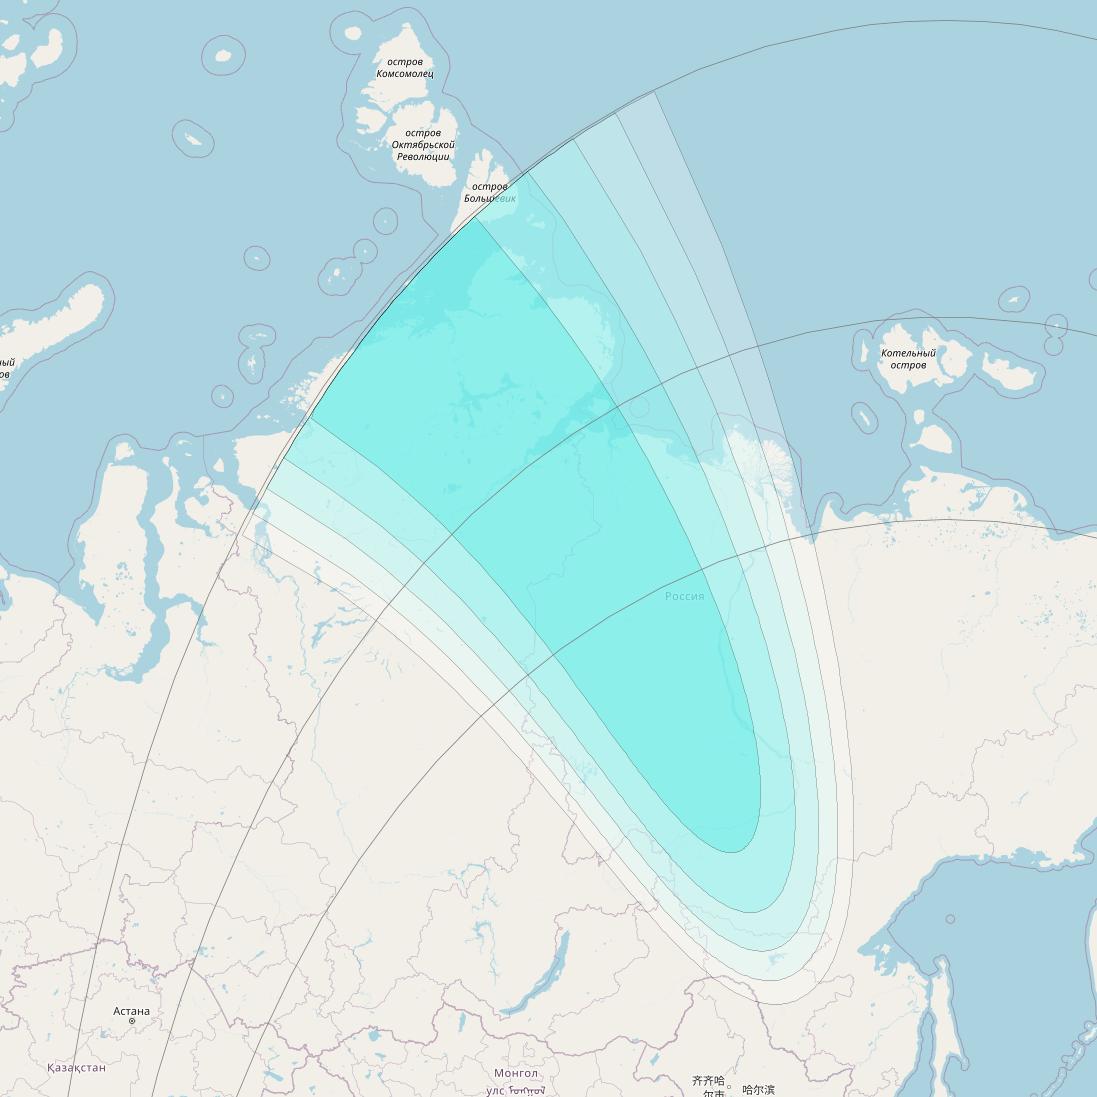 Inmarsat-4F1 at 143° E downlink L-band S082 User Spot beam coverage map